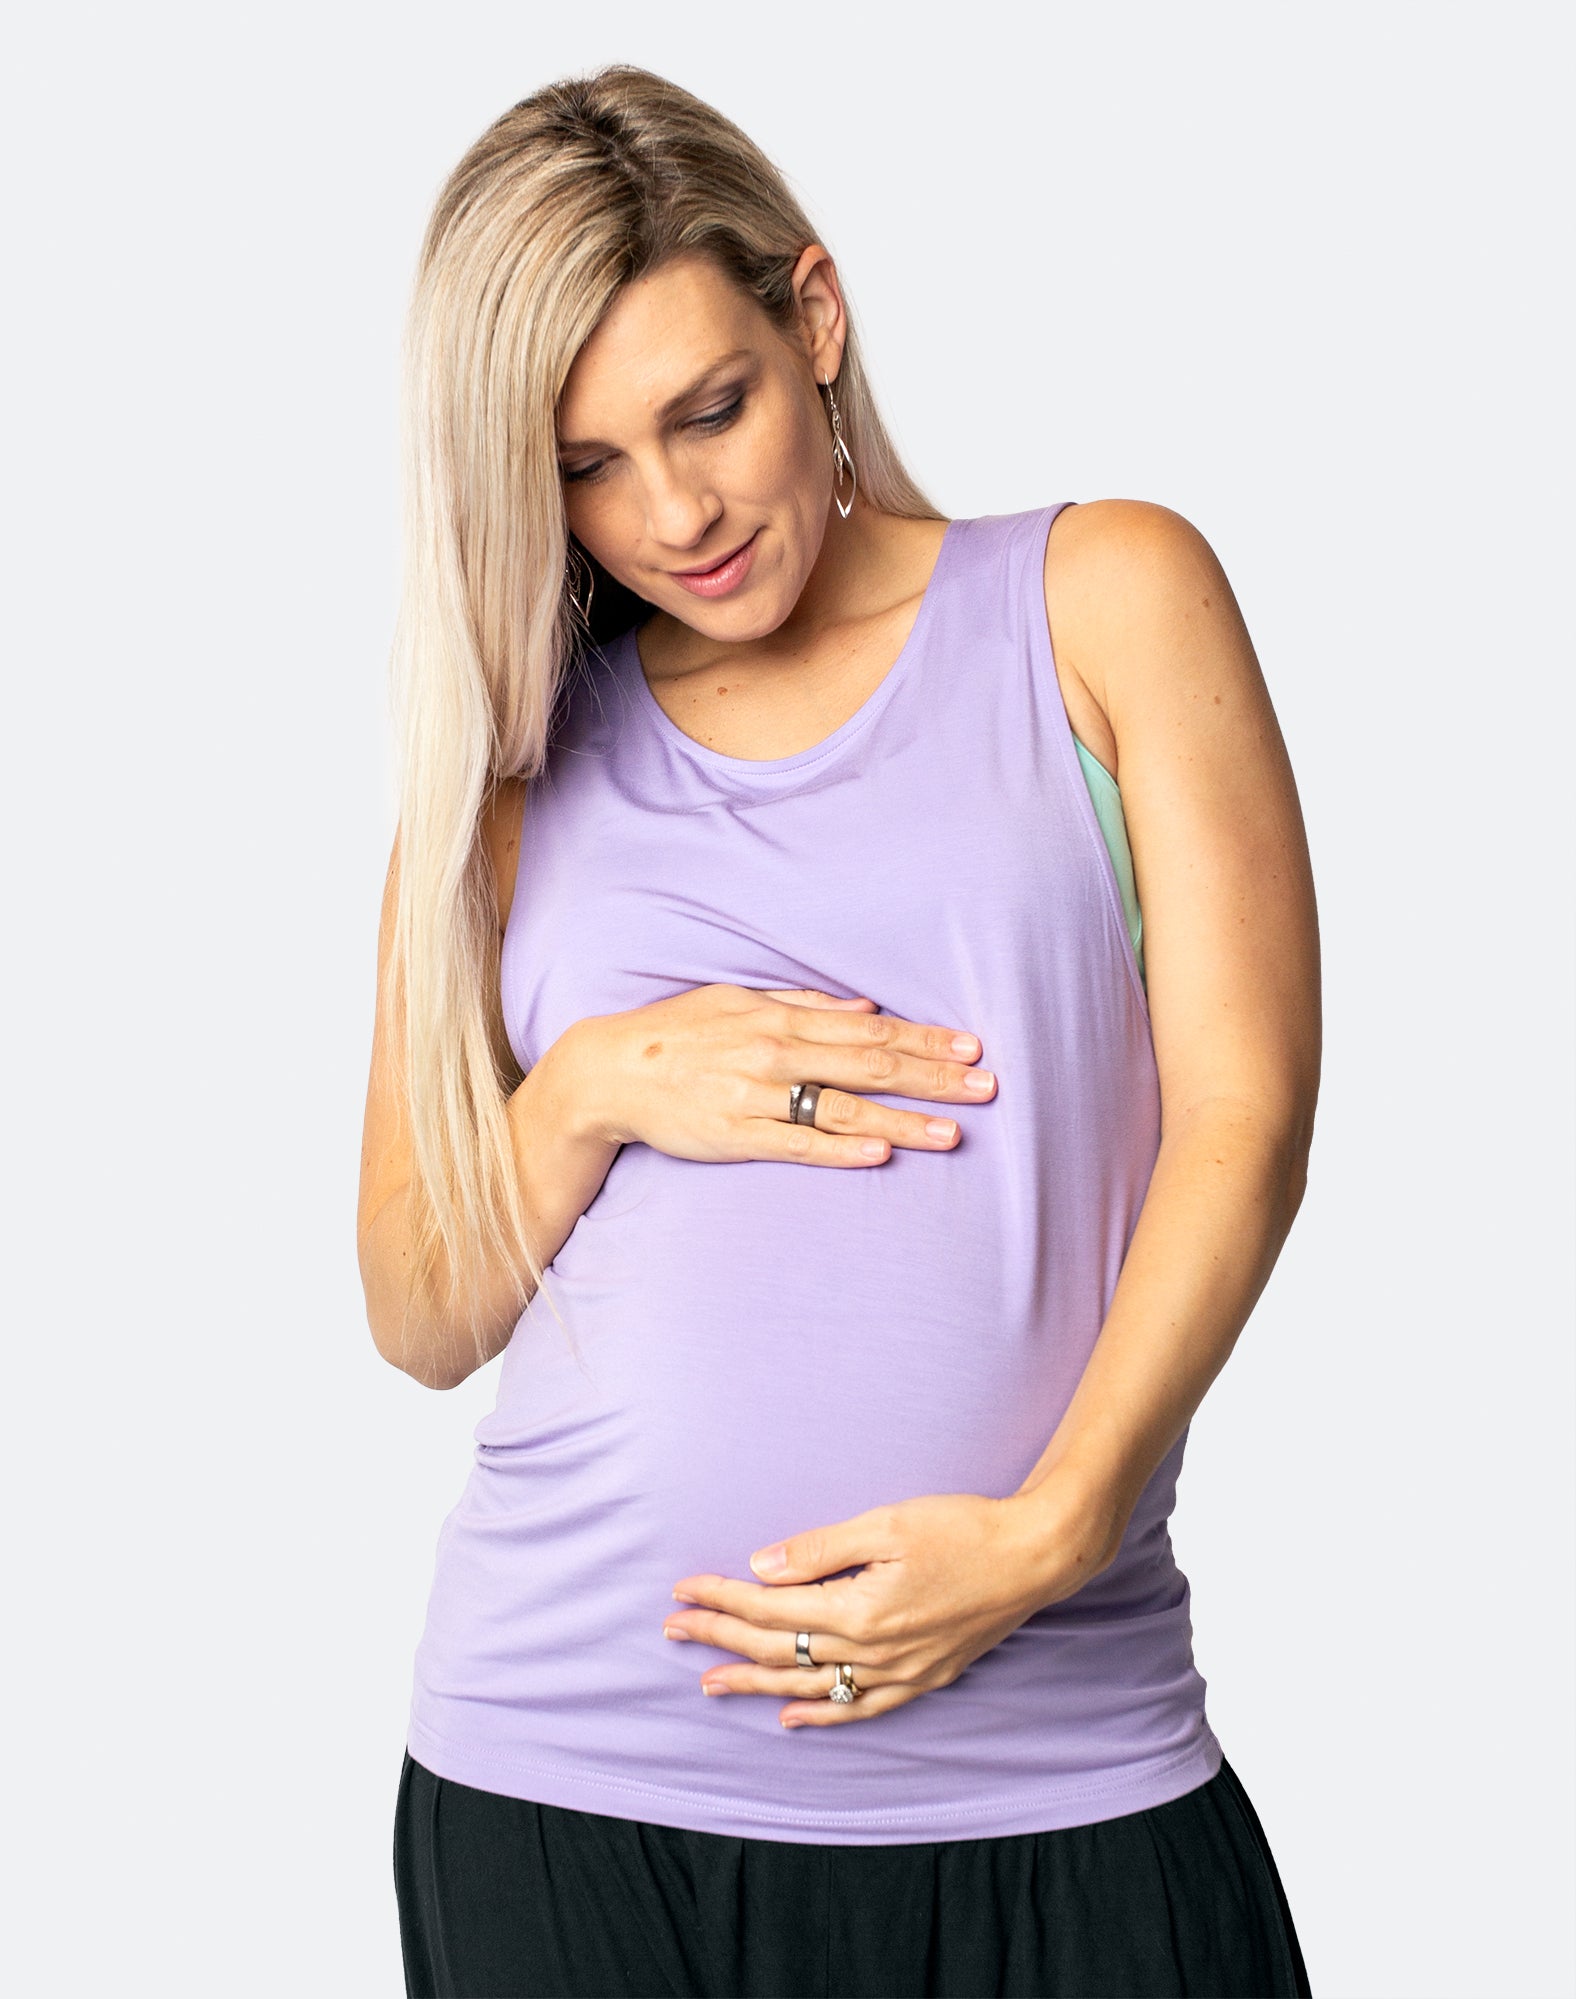 HEA Maternity - We have some exciting new consignments in size small  nursingwear! Like this Cadenshae Loose fit Tank Candy! . We help you save  money and look your best! . .